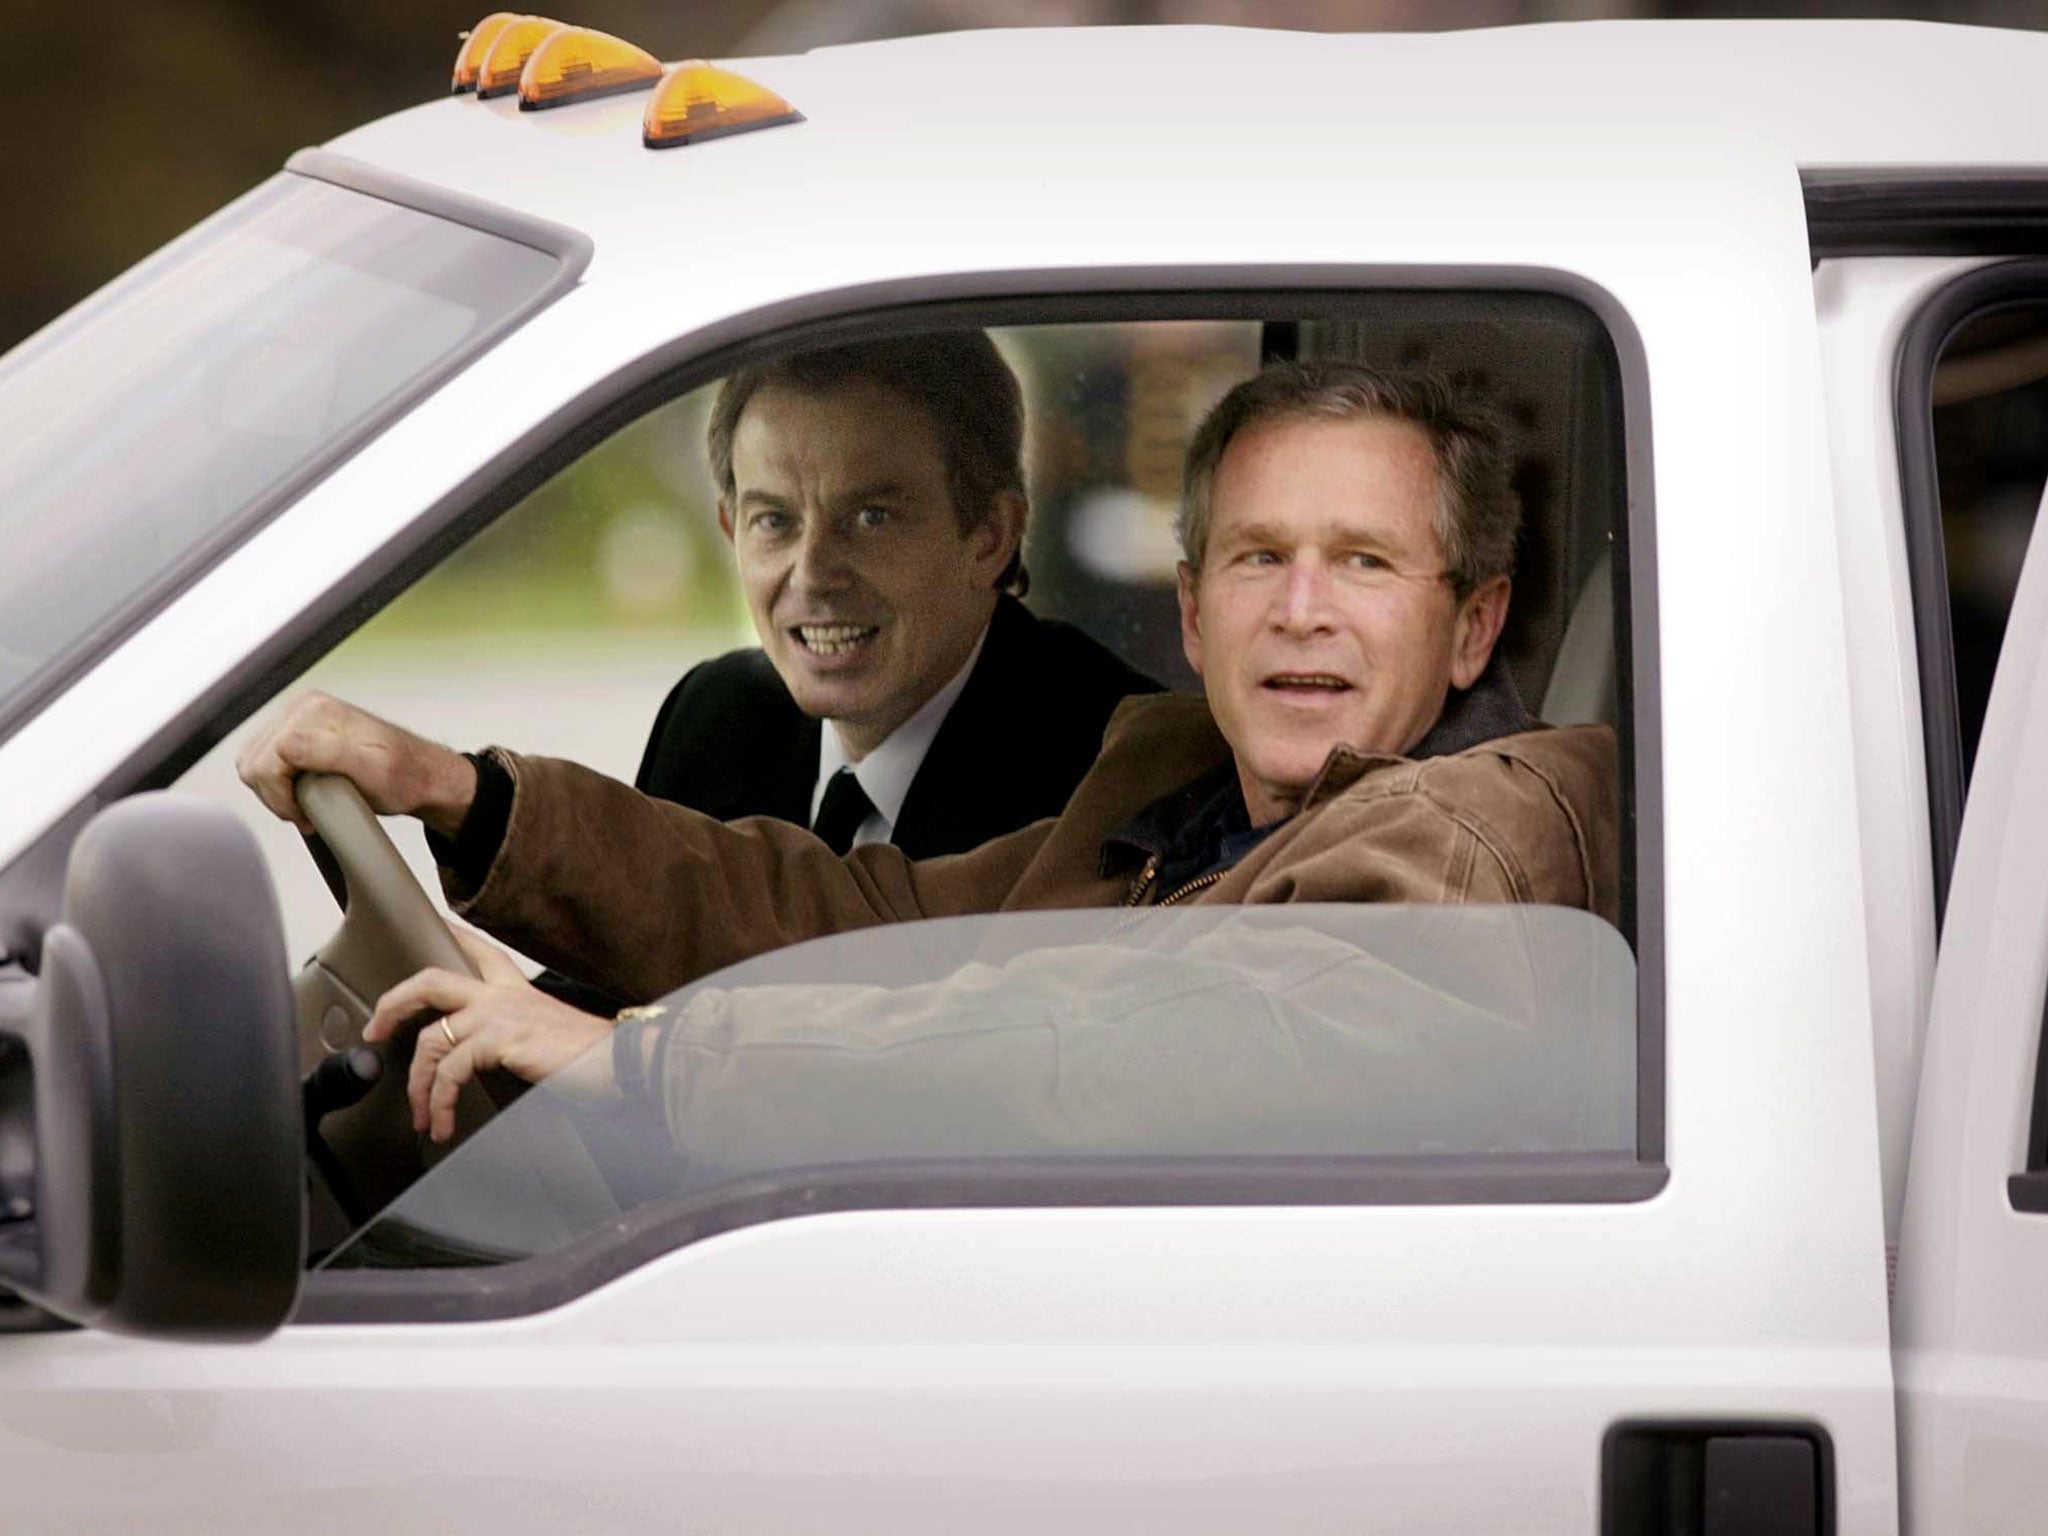 Blair with Bush in April 2002